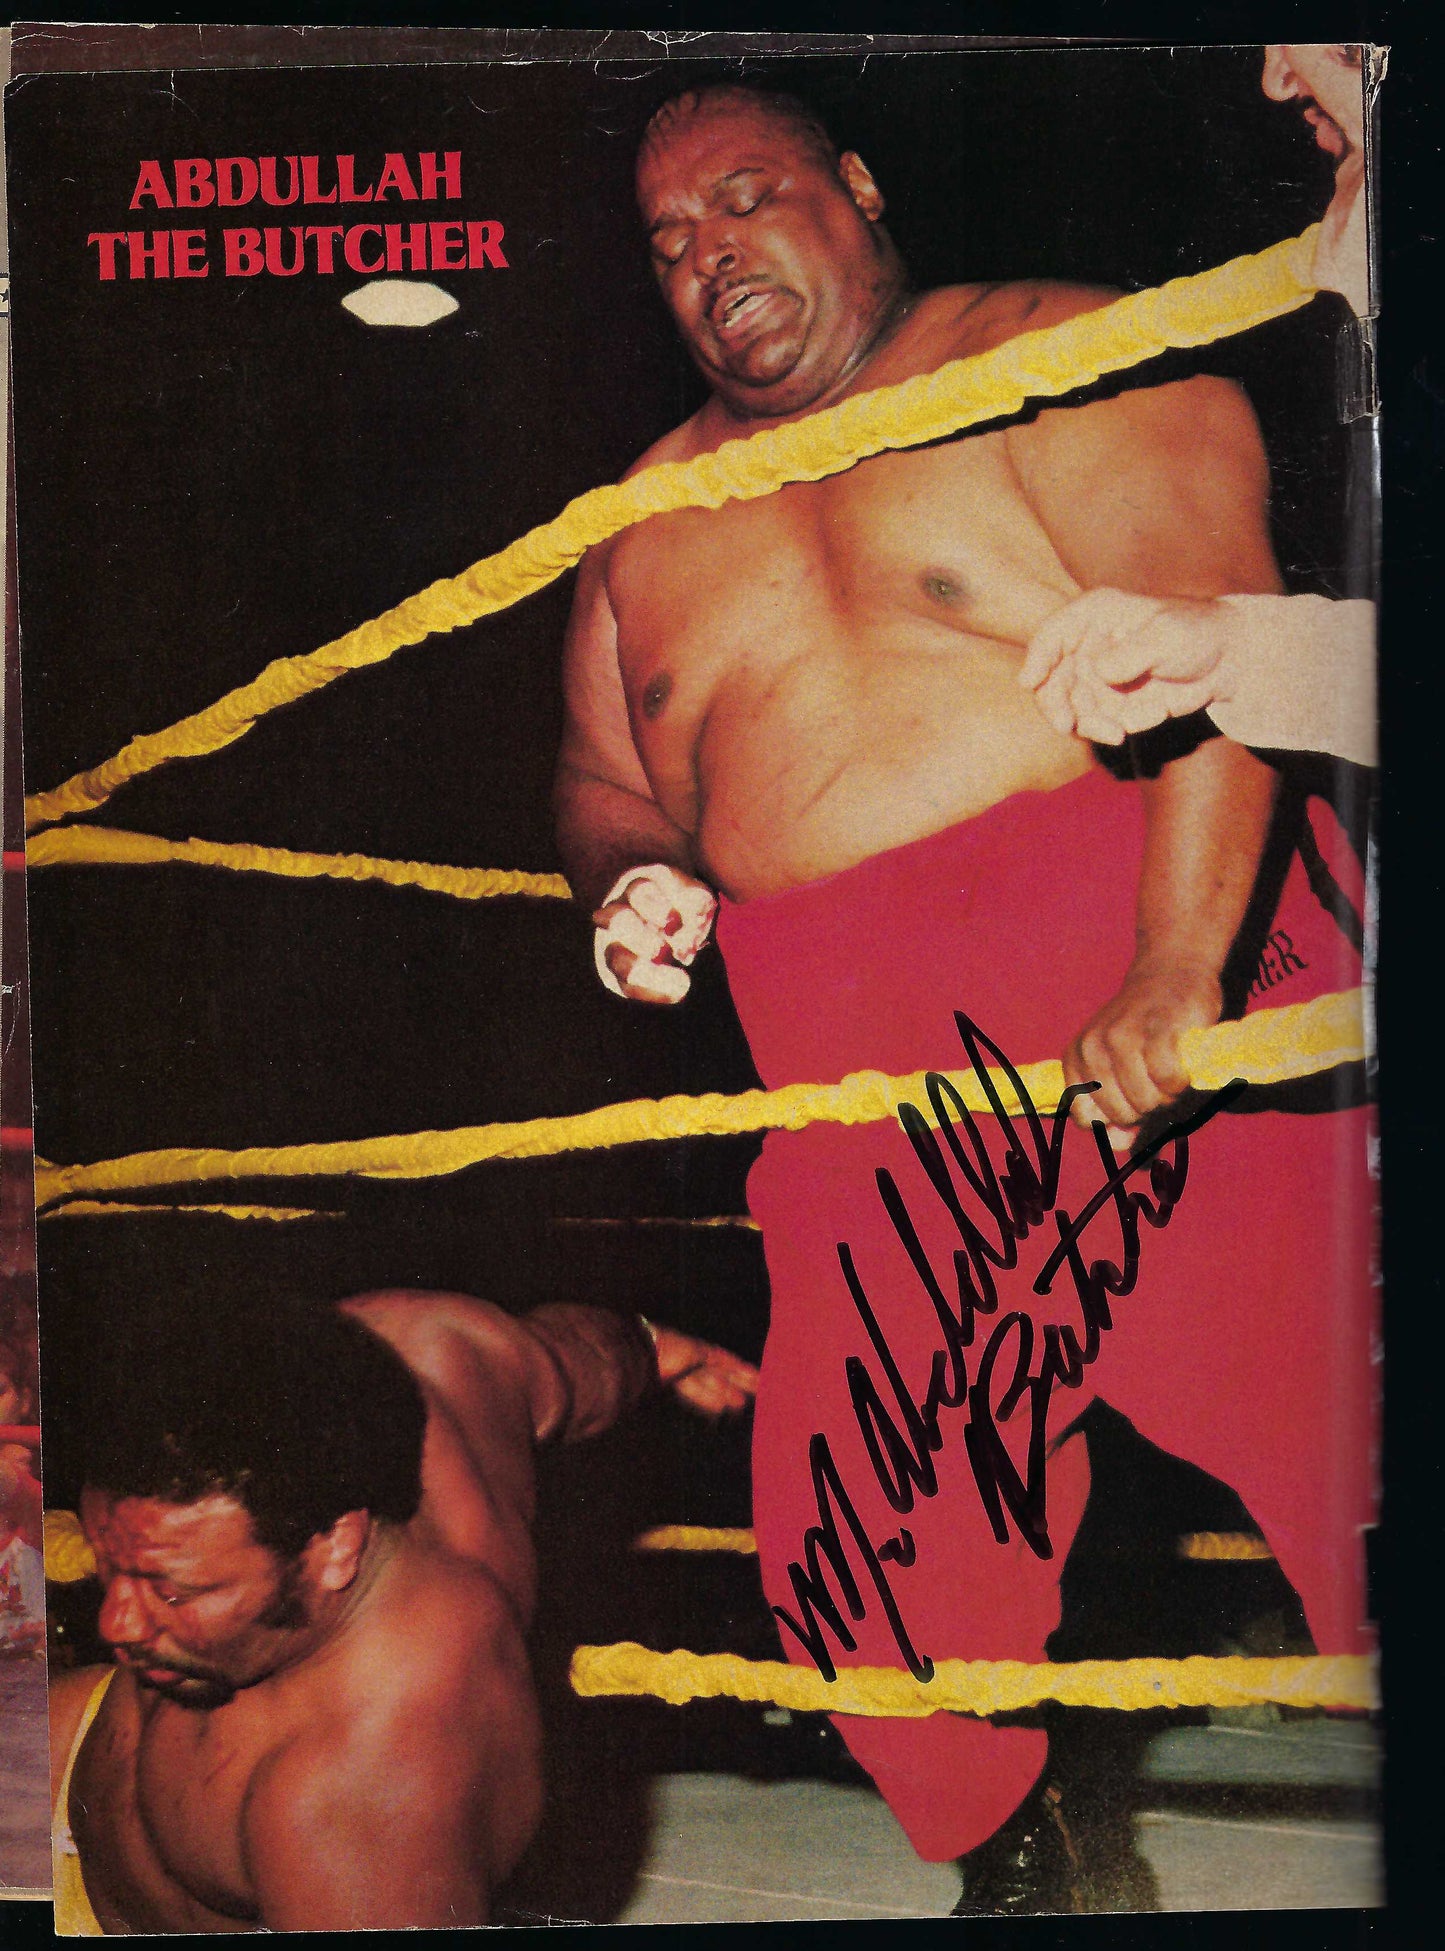 BD223  Road Warrior Animal  Jerry Lawler  Bob Backlund  Abdullah the Butcher Ric Flair   Autographed VERY RARE  Vintage Wrestling Magazine w/COA